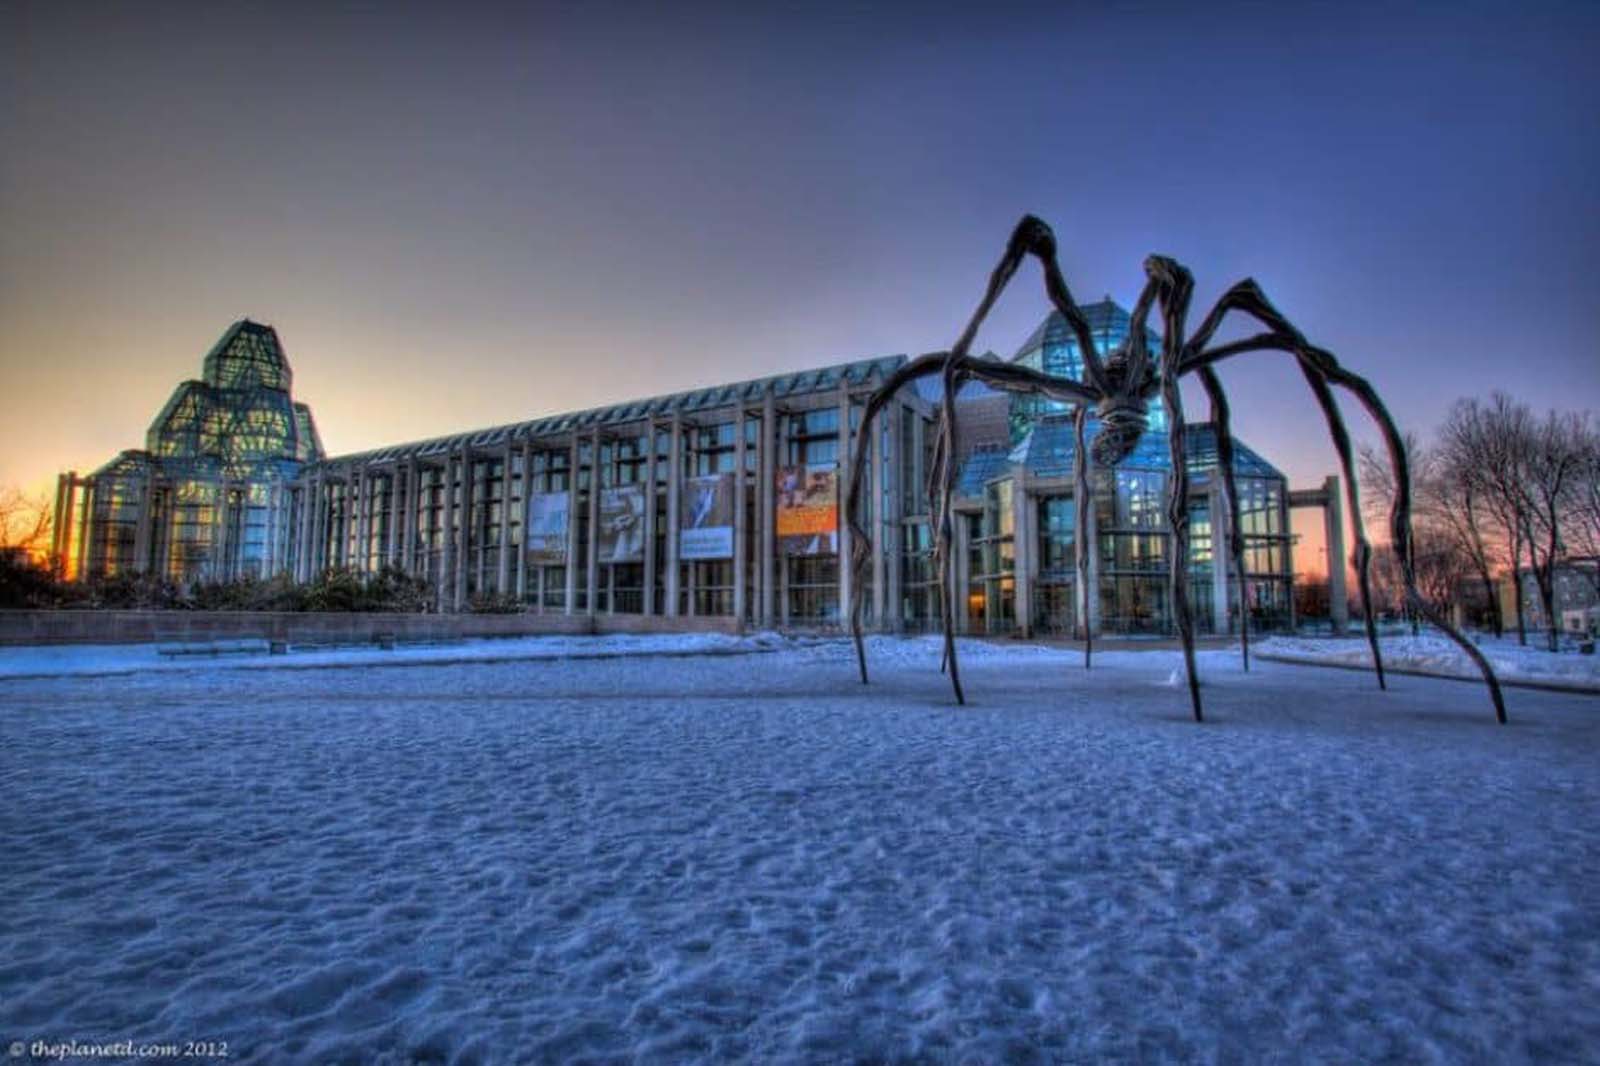 maman in front of iconic ottawa landmark the National Gallery of Canada